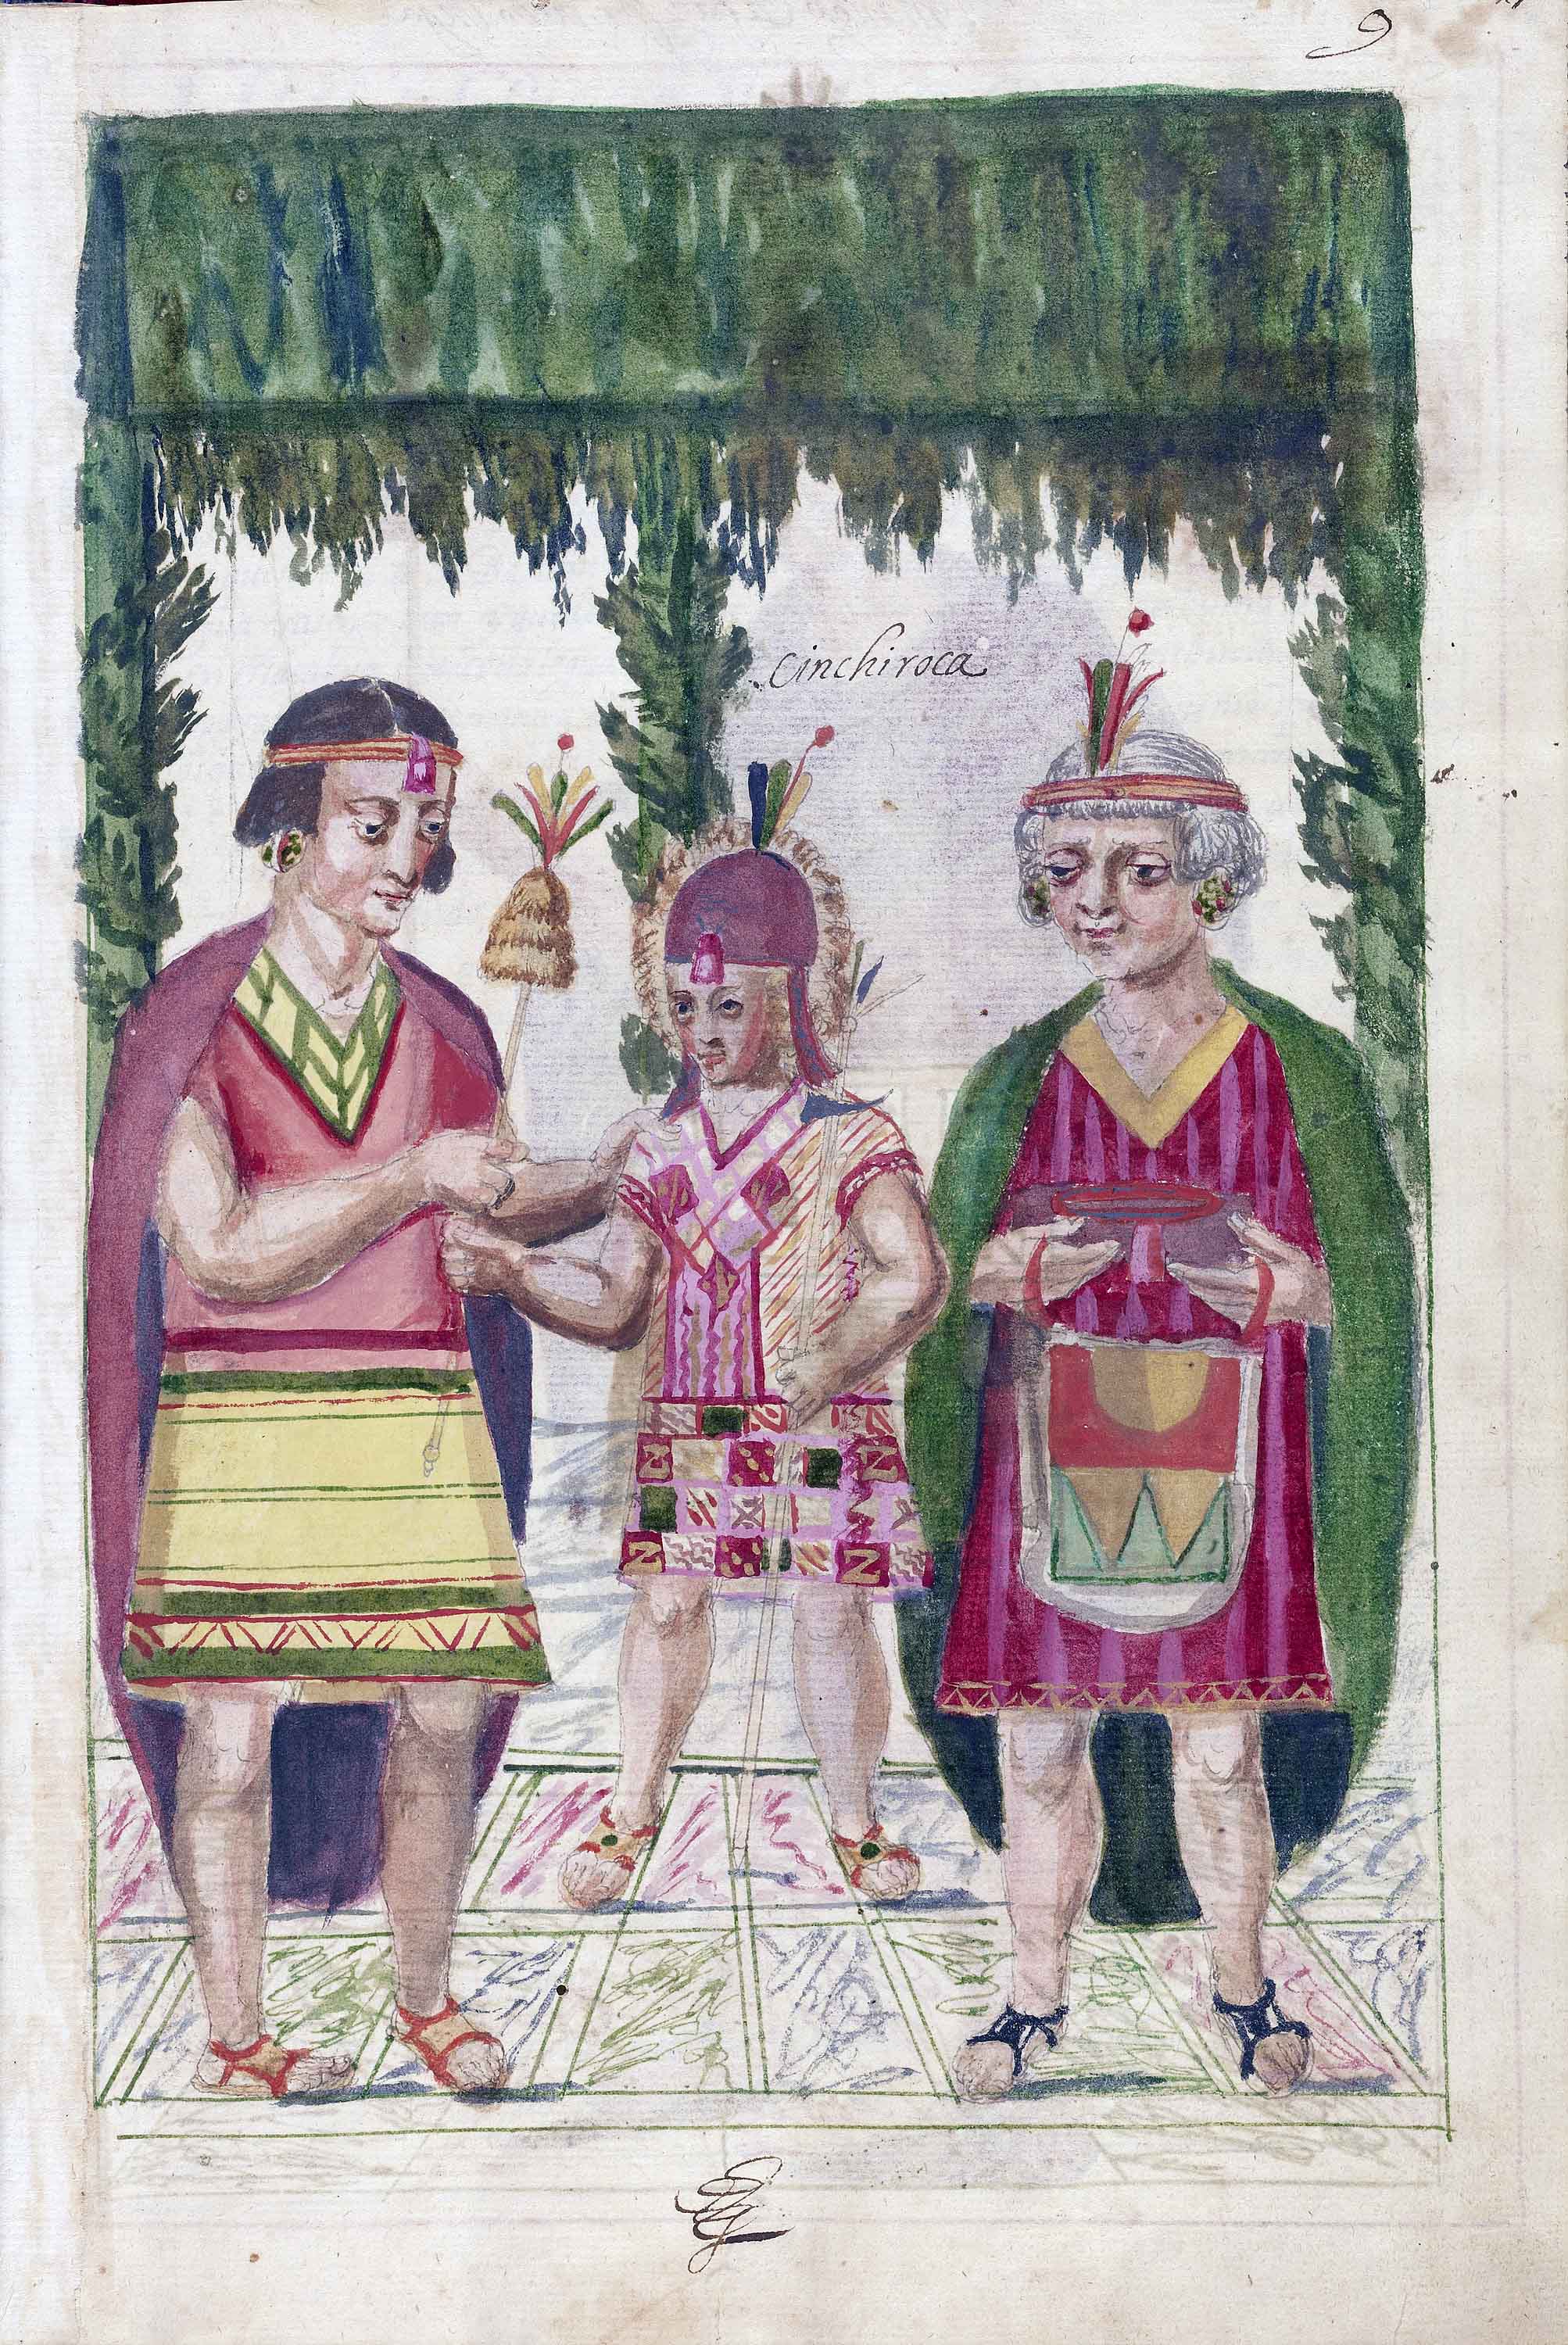 Inka ruler, in Martín de Murúa's <em>Historia general del Piru</em>, completed in 1616, Pen and ink and colored washes on paper bound between pasteboard covered with morocco leather Leaf: 28.9 × 20 cm (11 3/8 × 7 7/8 in.), Ms. Ludwig XIII 16 (83.MP.159) (The J. Paul Getty Museum, Los Angeles)